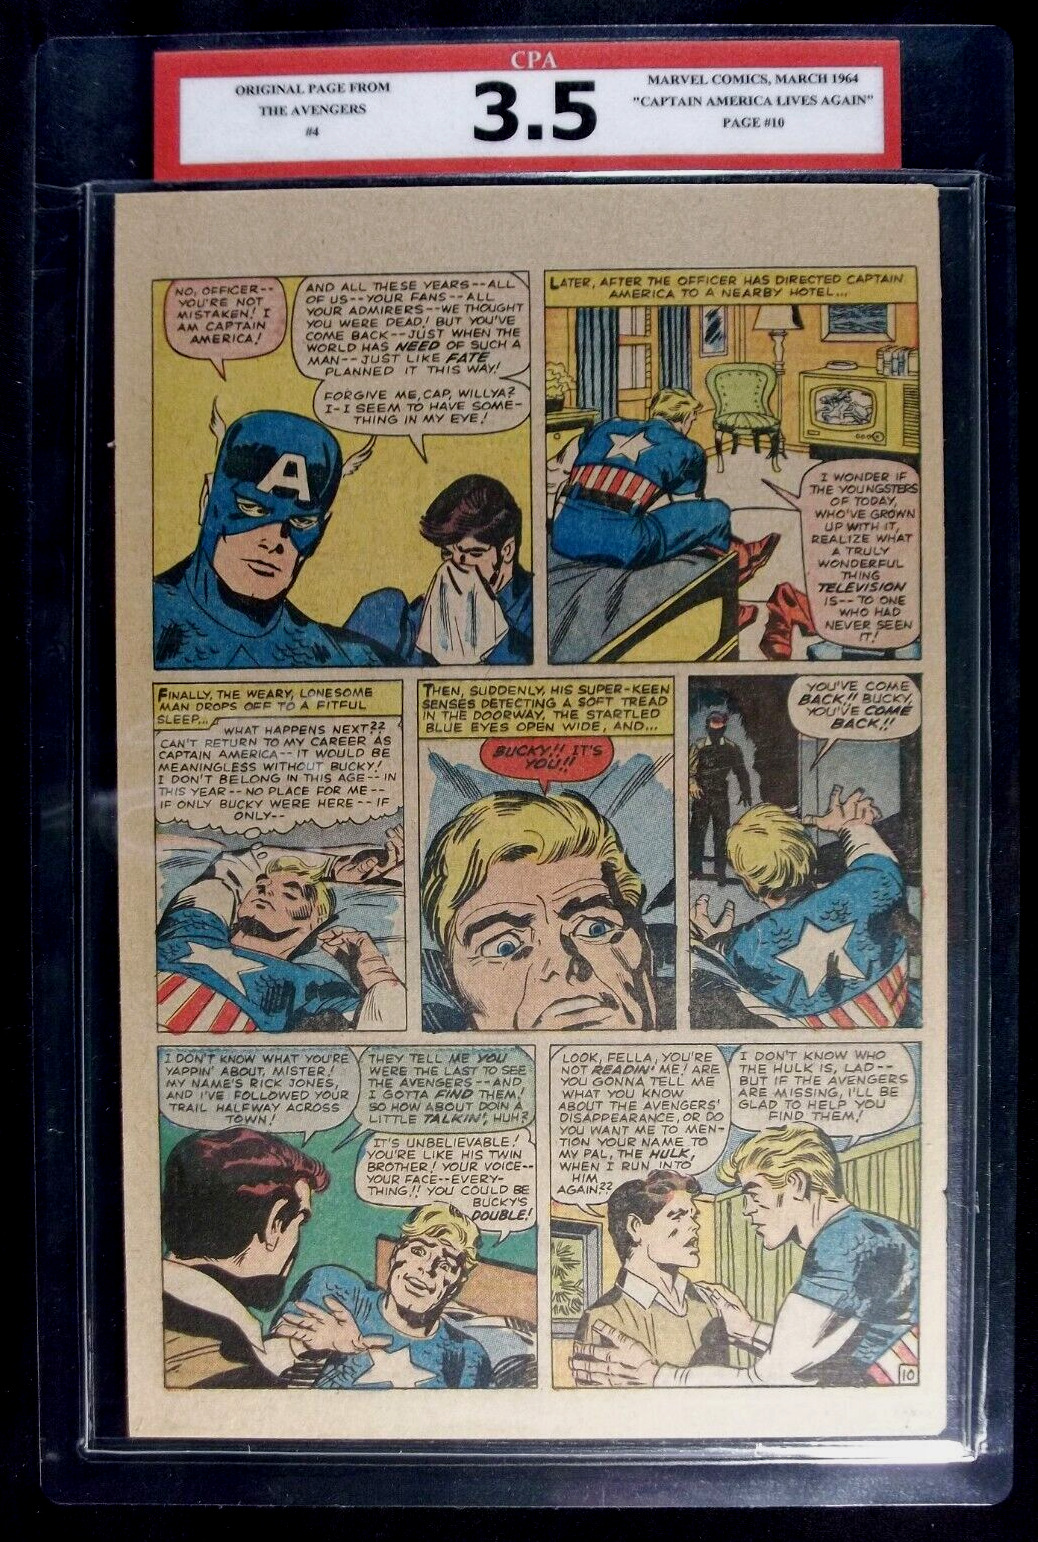 The Avengers #4 CPA 3.5 SINGLE PAGE #10 1st Silver Age App. of Captain America